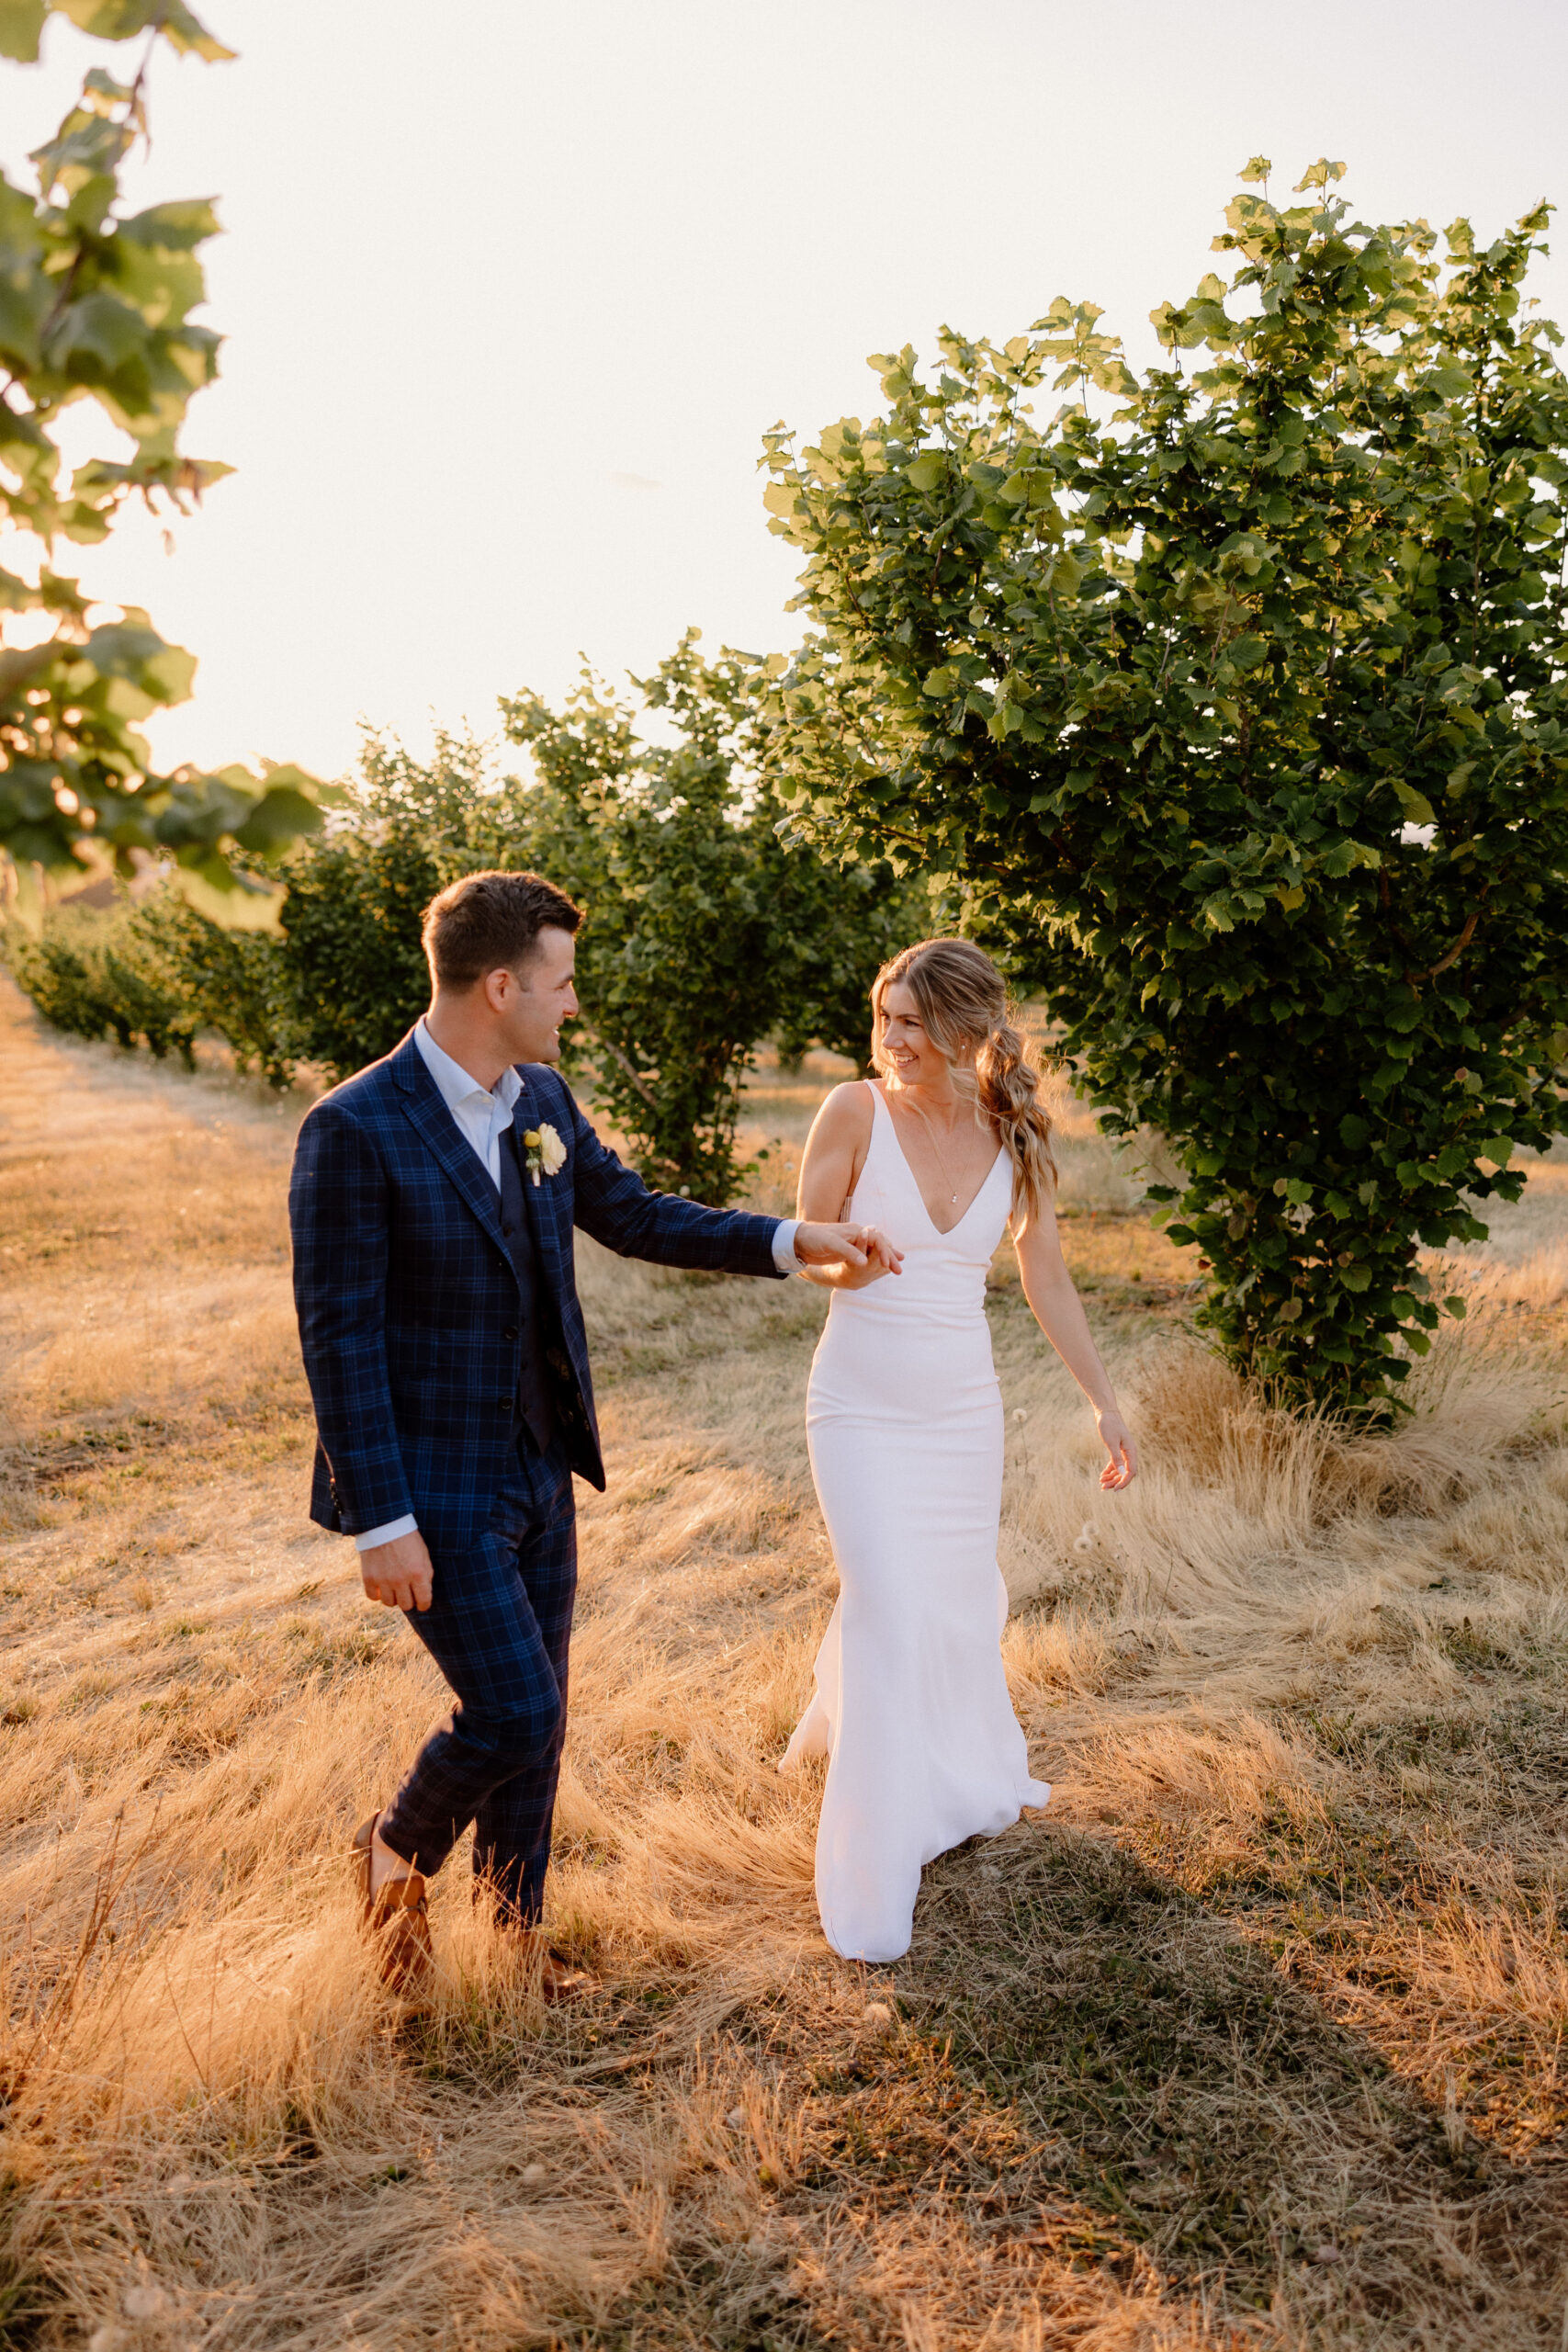 A bride and groom taking sunset portraits in an Oregon vineyard.